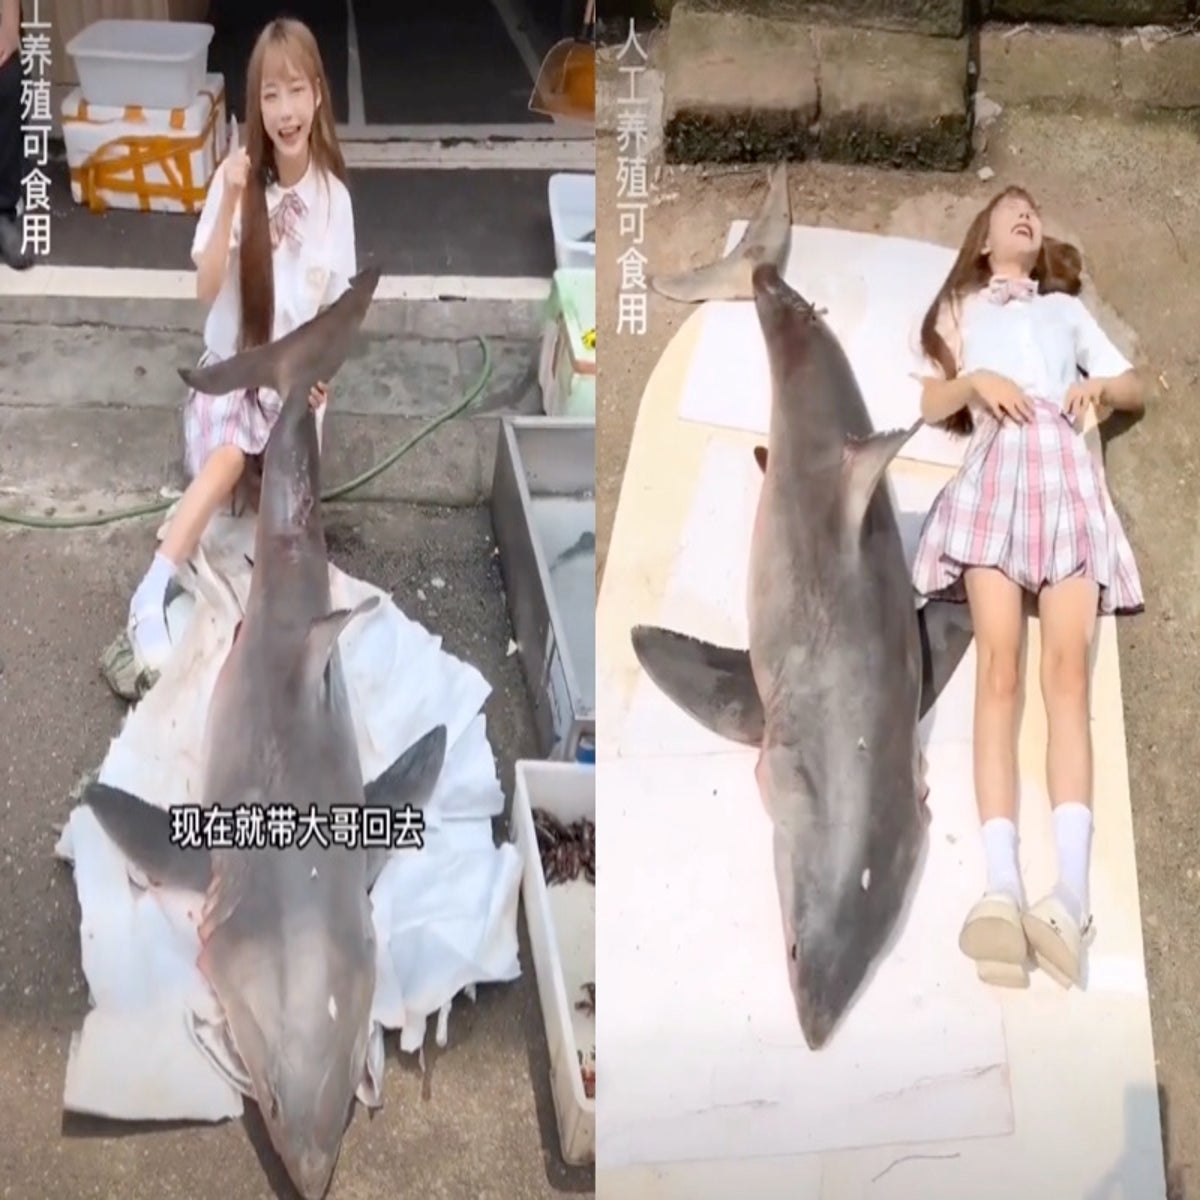 Chinese food blogger fined $18,500 after cooking and eating great white  shark | The Independent